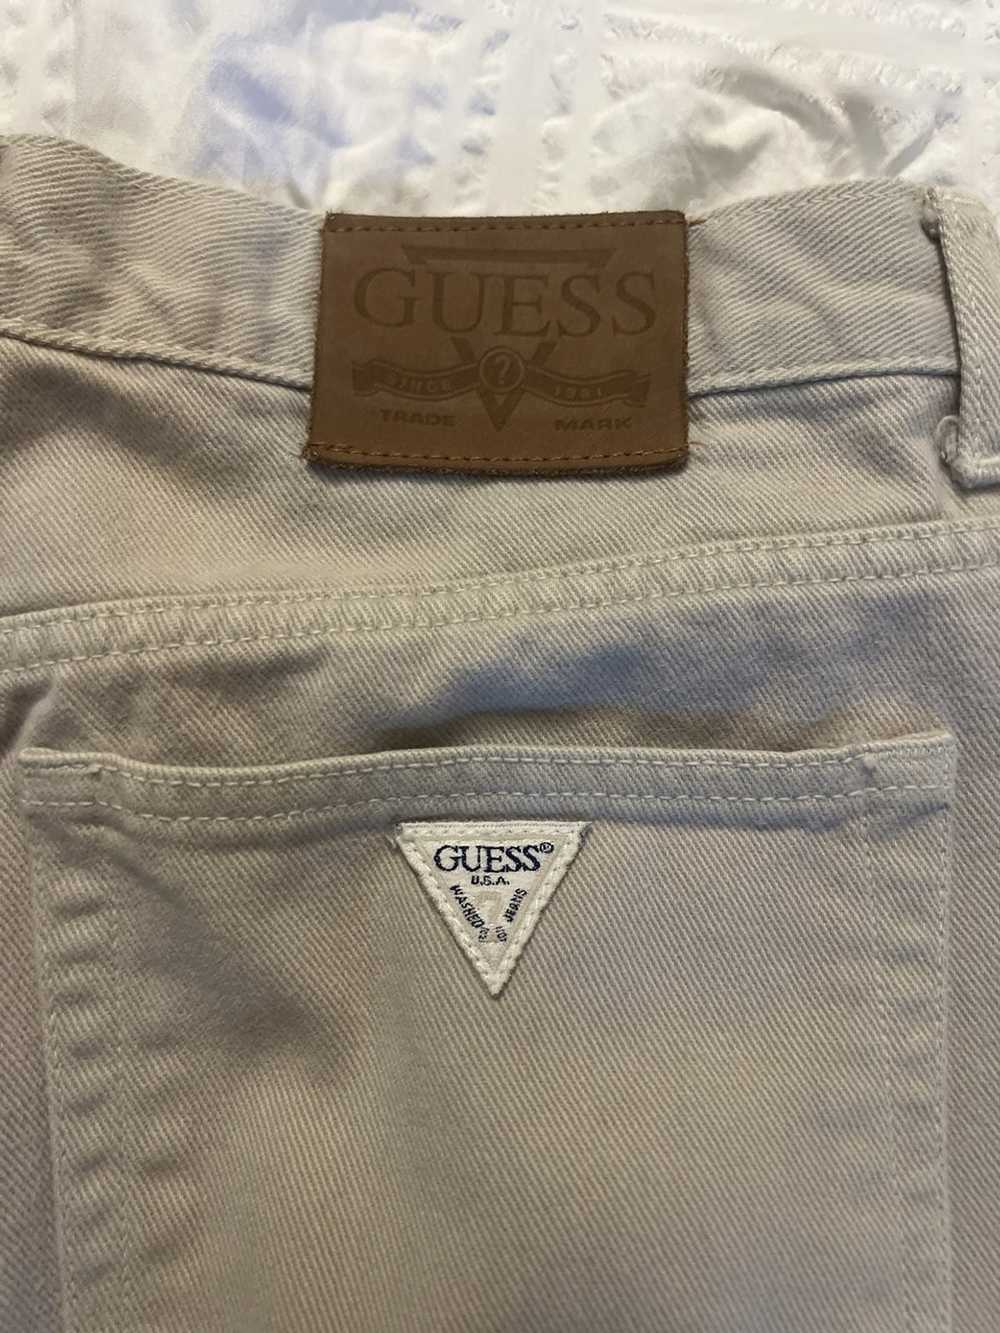 Guess Vintage Guess Jeans - image 2